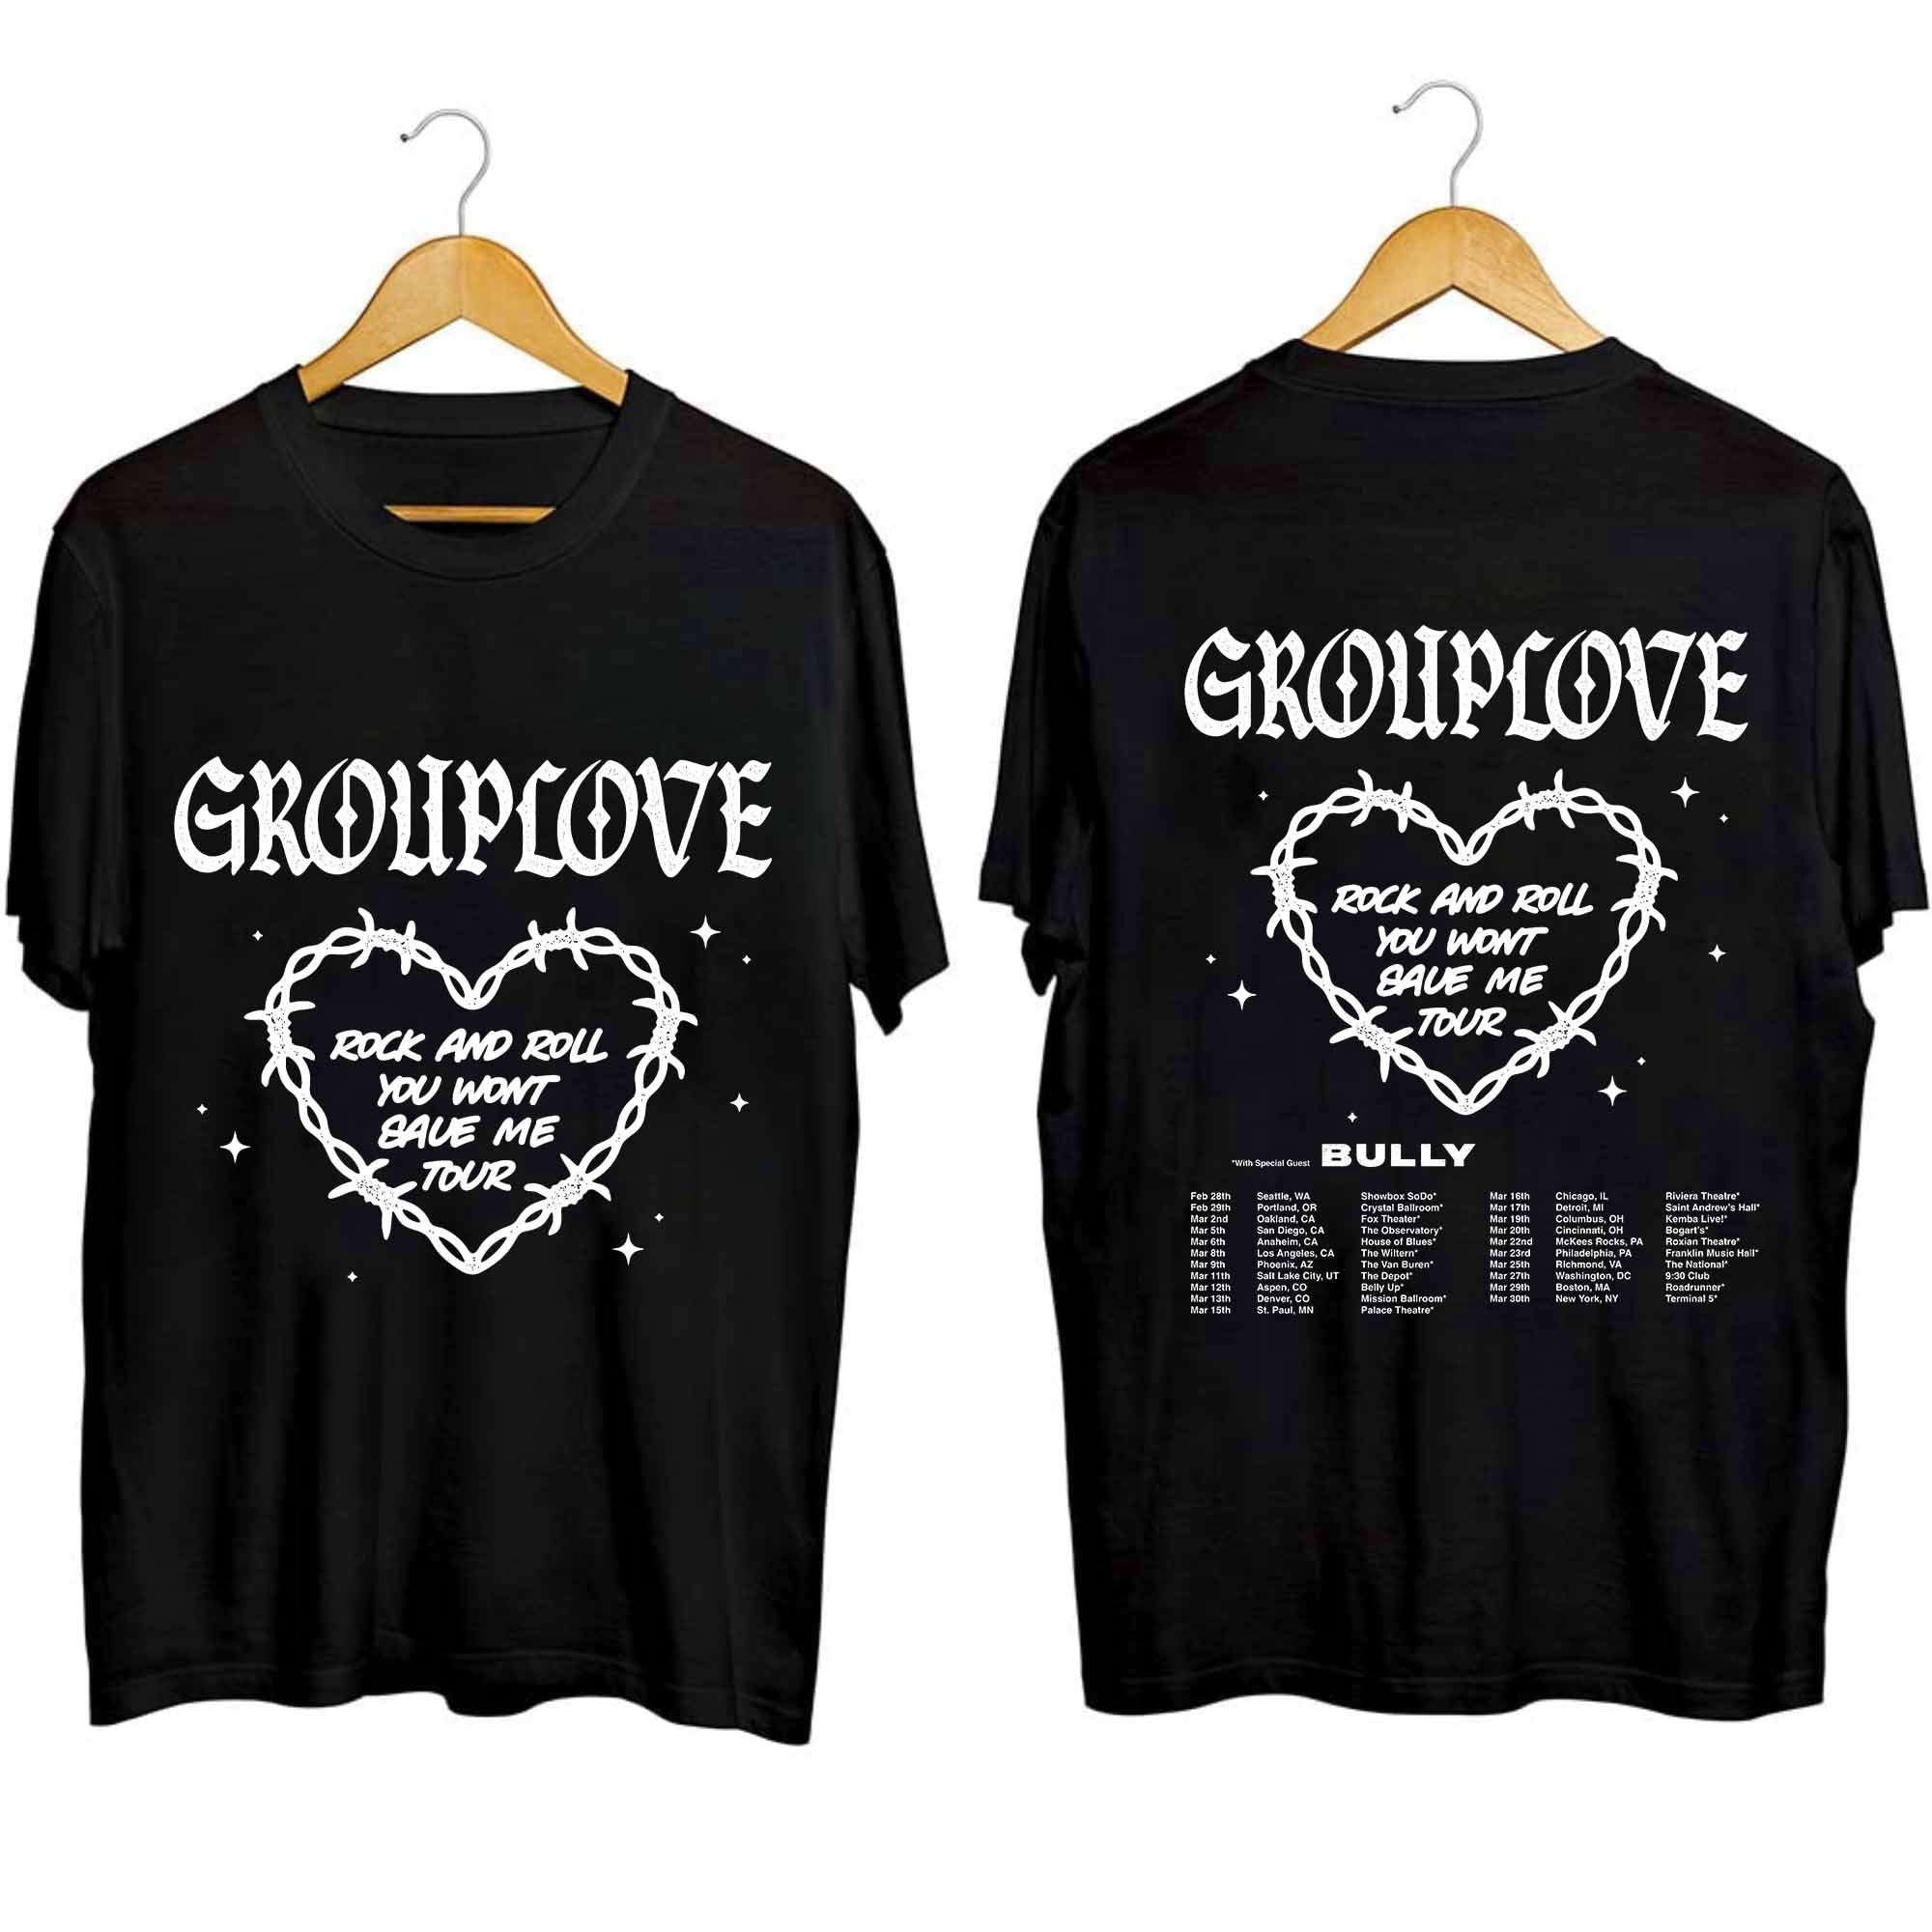 Grouplove And Bully 2024 Rock And Roll You Won’t Save Me Tour Shirt, Grouplove And Bully Band Fan Shirt, You Won’t Save Me Tour 2024 Shirt 1